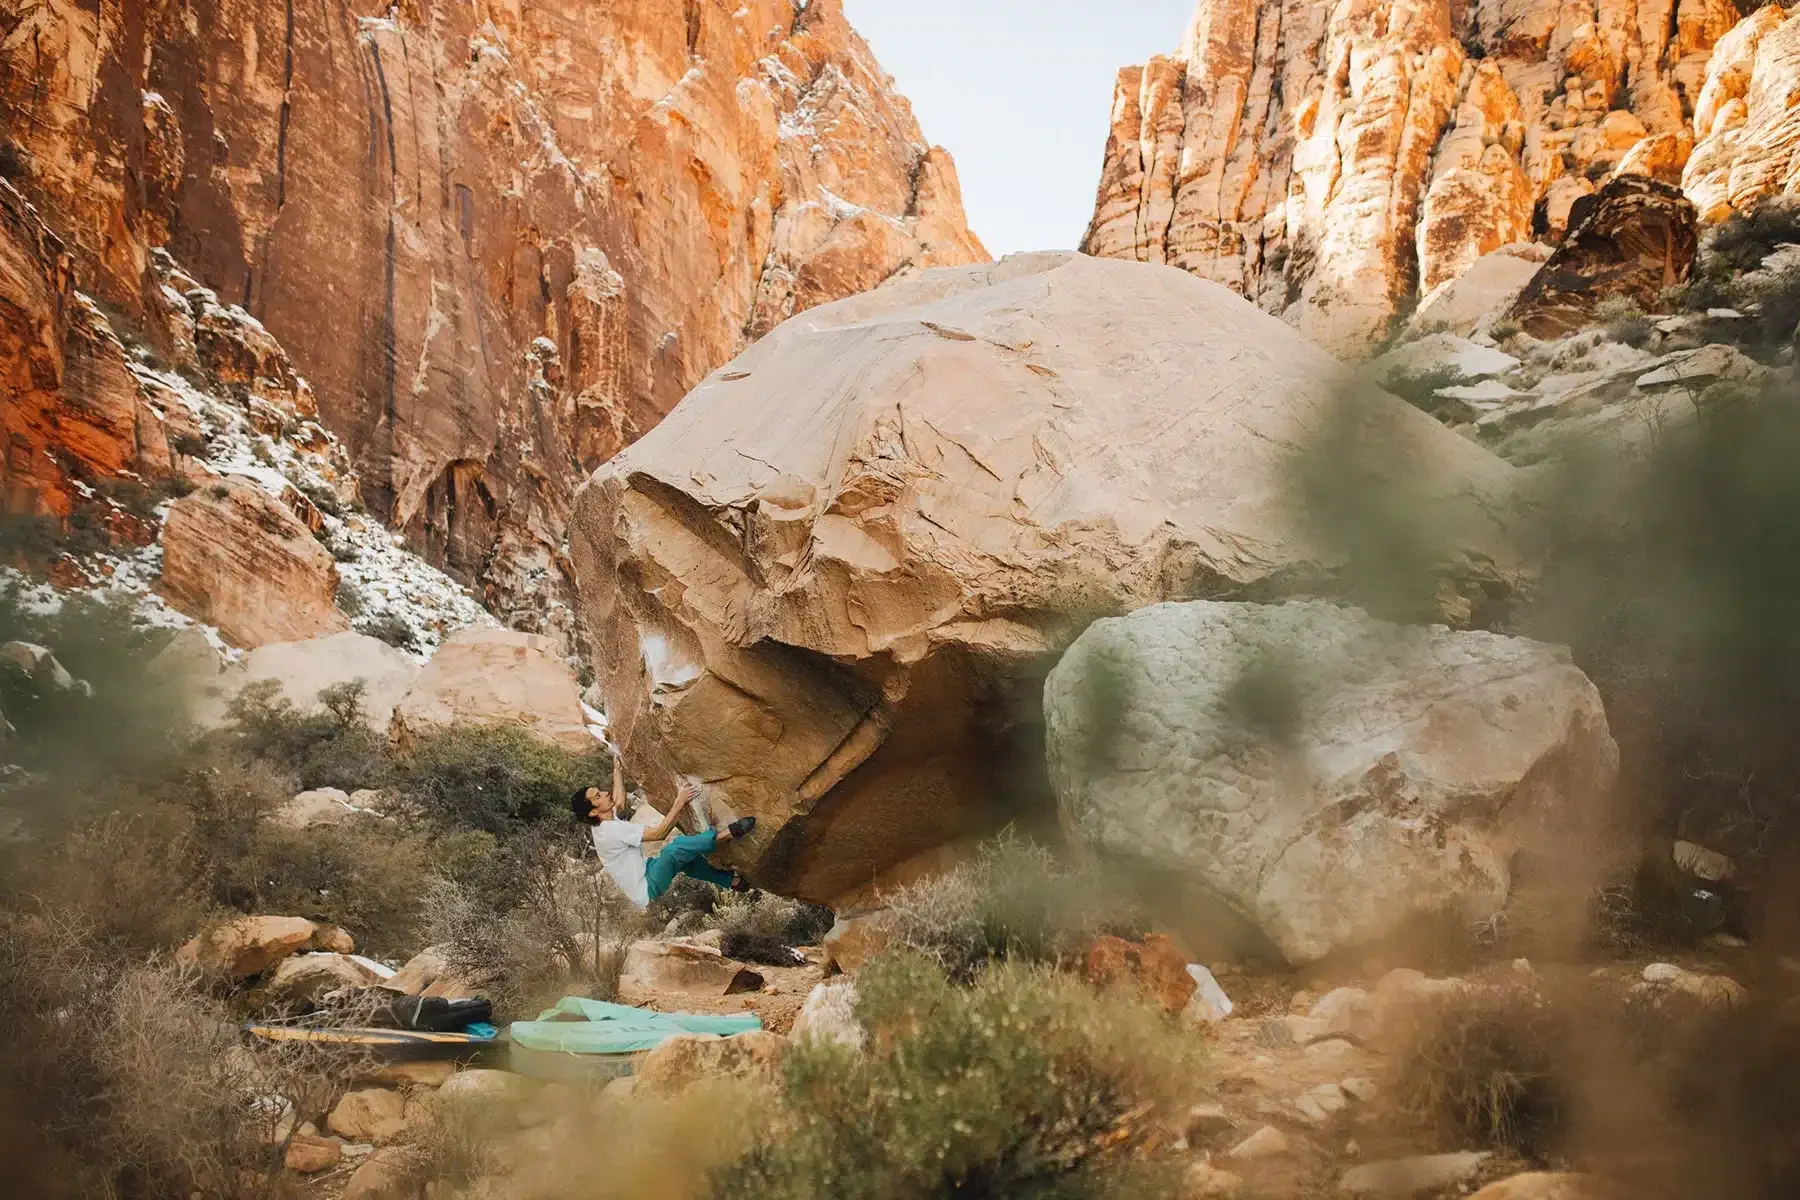 A rock climber wearing a white shirt and blue pants is bouldering on a large, overhanging boulder in a canyon with reddish rock walls. The scene includes climbing pads at the base of the boulder and sparse vegetation around.